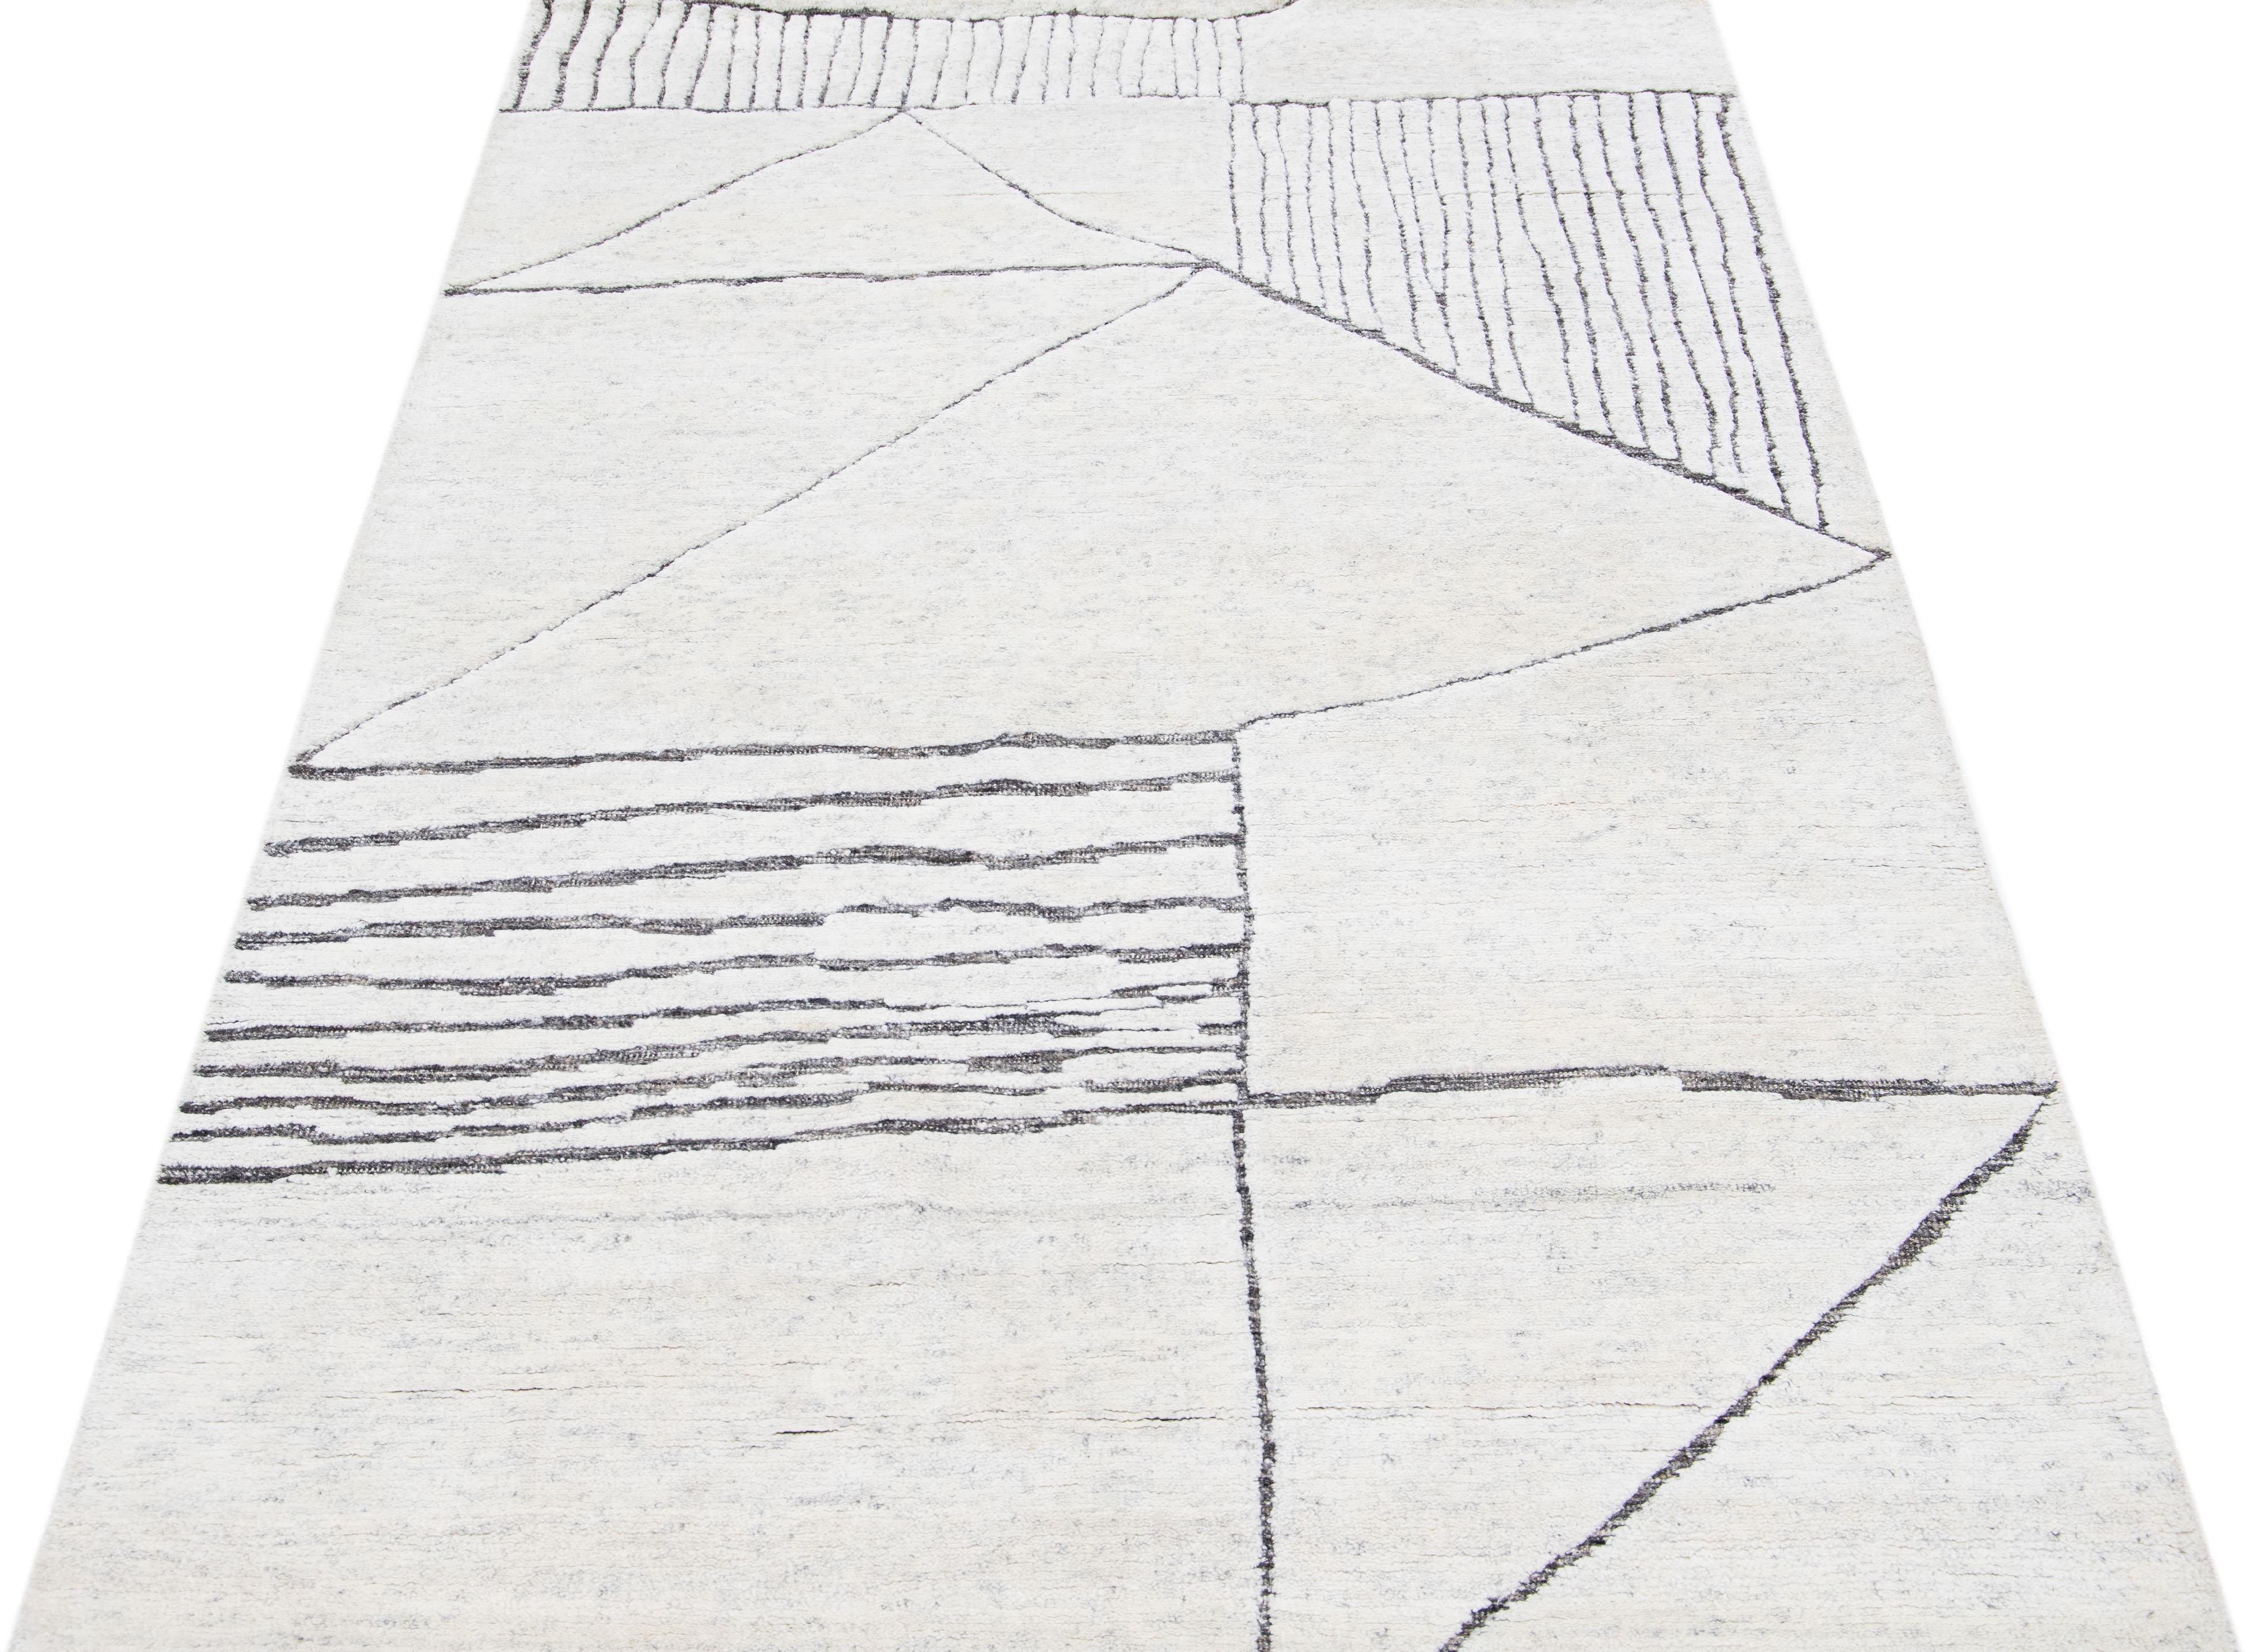 Beautiful modern Moroccan-style hand-knotted wool rug with an ivory color field. This rug is part of our Apadana's Safi Collection and features a minimalist design in gray.

This rug measures: 5' x 7'11